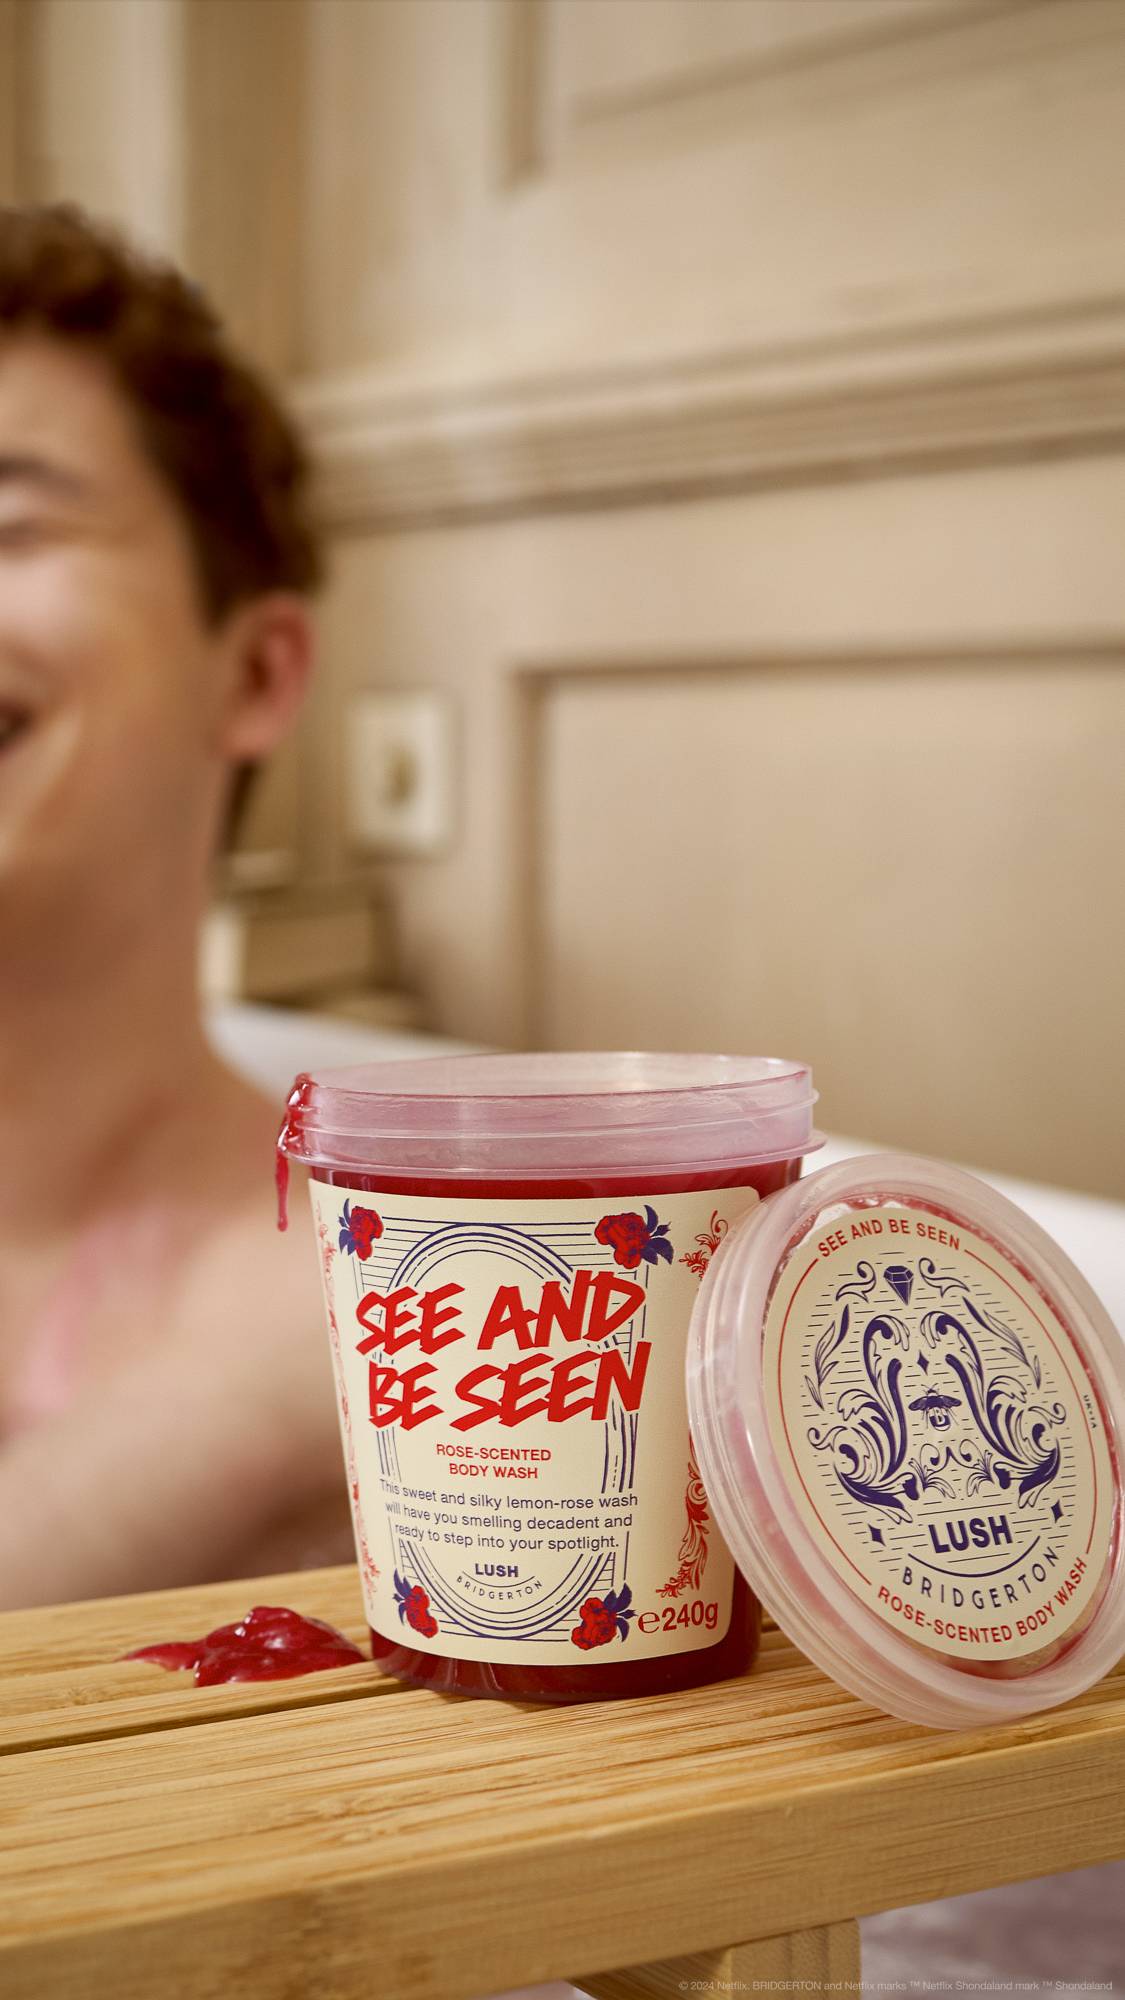 The image shows an out-of-focus model bathing in the background. The foreground focuses on the open, clear, LUSH pot of See And Be Seen body wash sitting on a wooden bath tray. Some product has been spilled. 